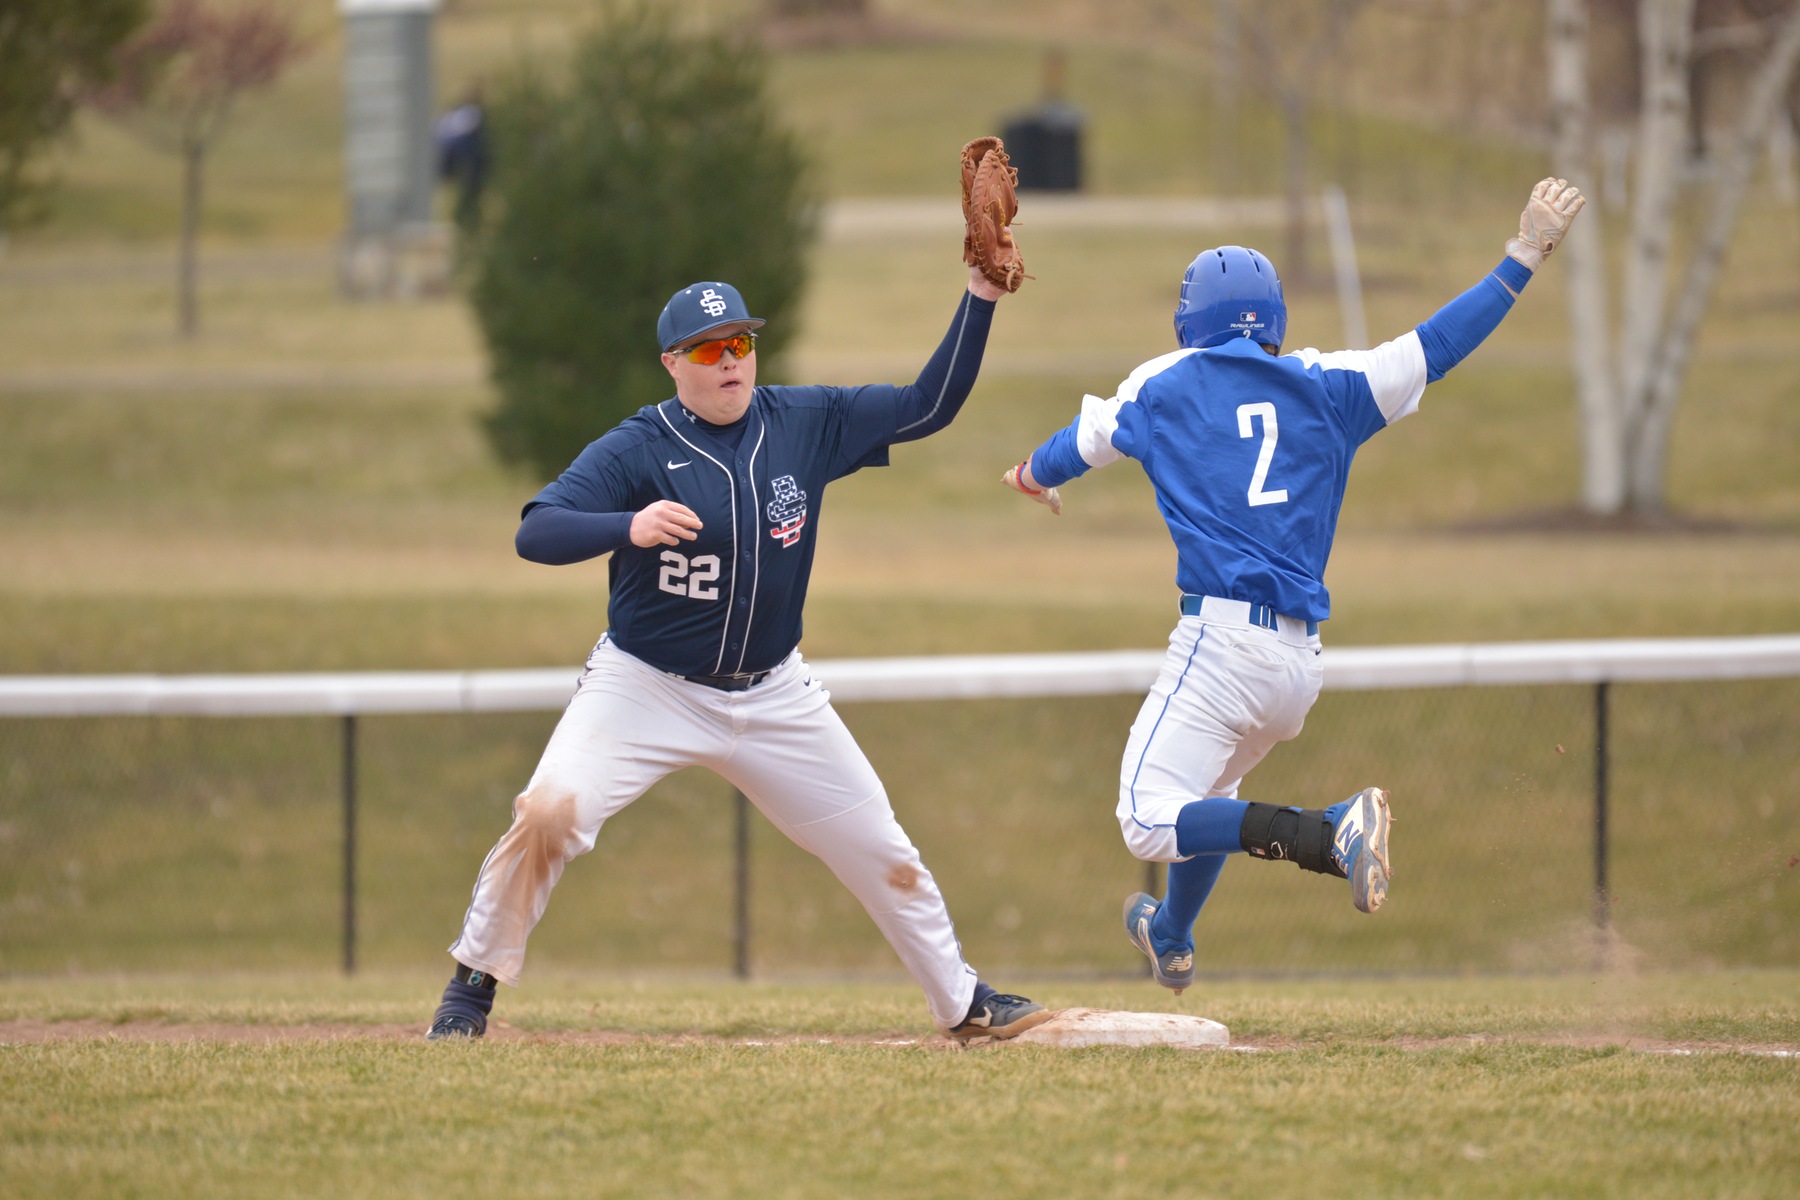 Behrend Basebal Heads to Alfred State Saturday in AMCC Action